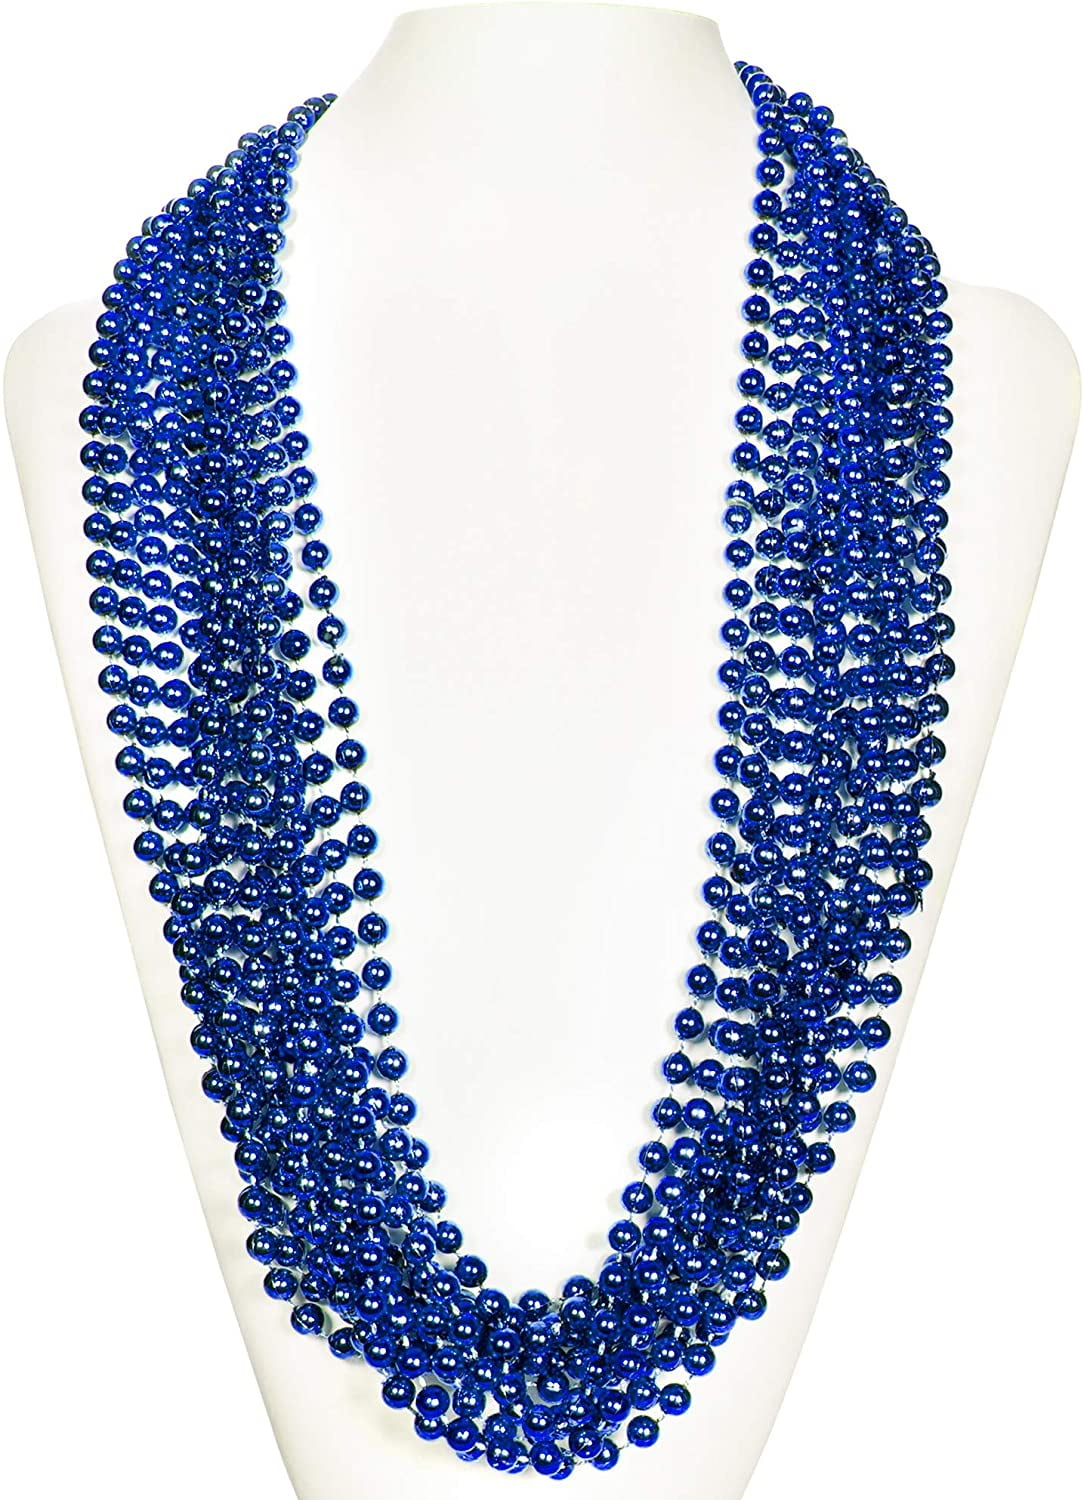  33 Inch 12 Mm Metallic Blue Bead Necklaces, 15pcs Mardi Gras  Beads Bulk Round Beaded Necklaces Costume Necklace For 4th Of July Party  Christmas Festive Events, Party Favors